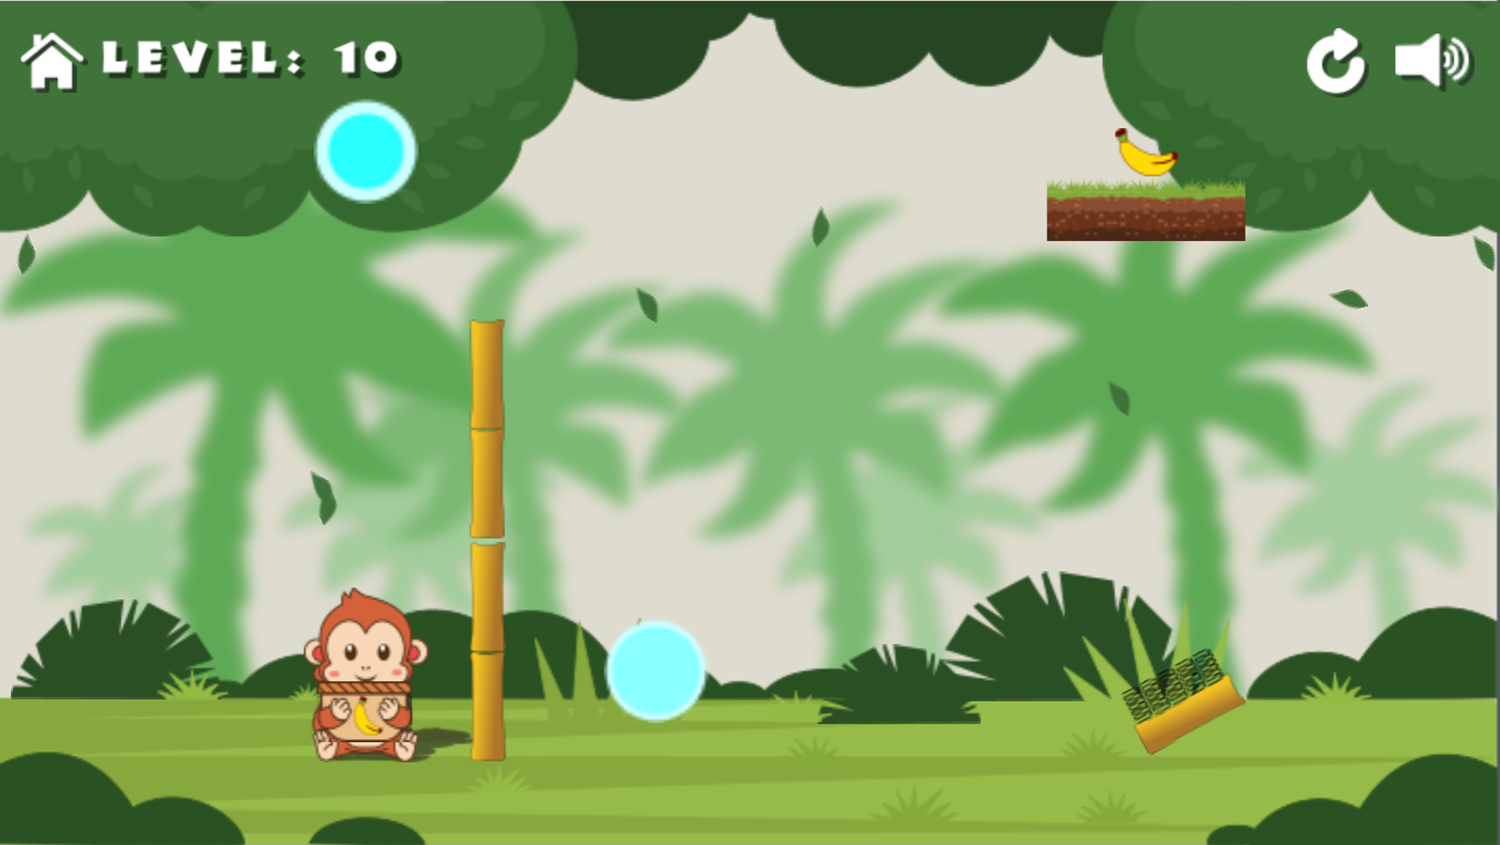 Monkeys and Fruits Game Level With Springs Screenshot.